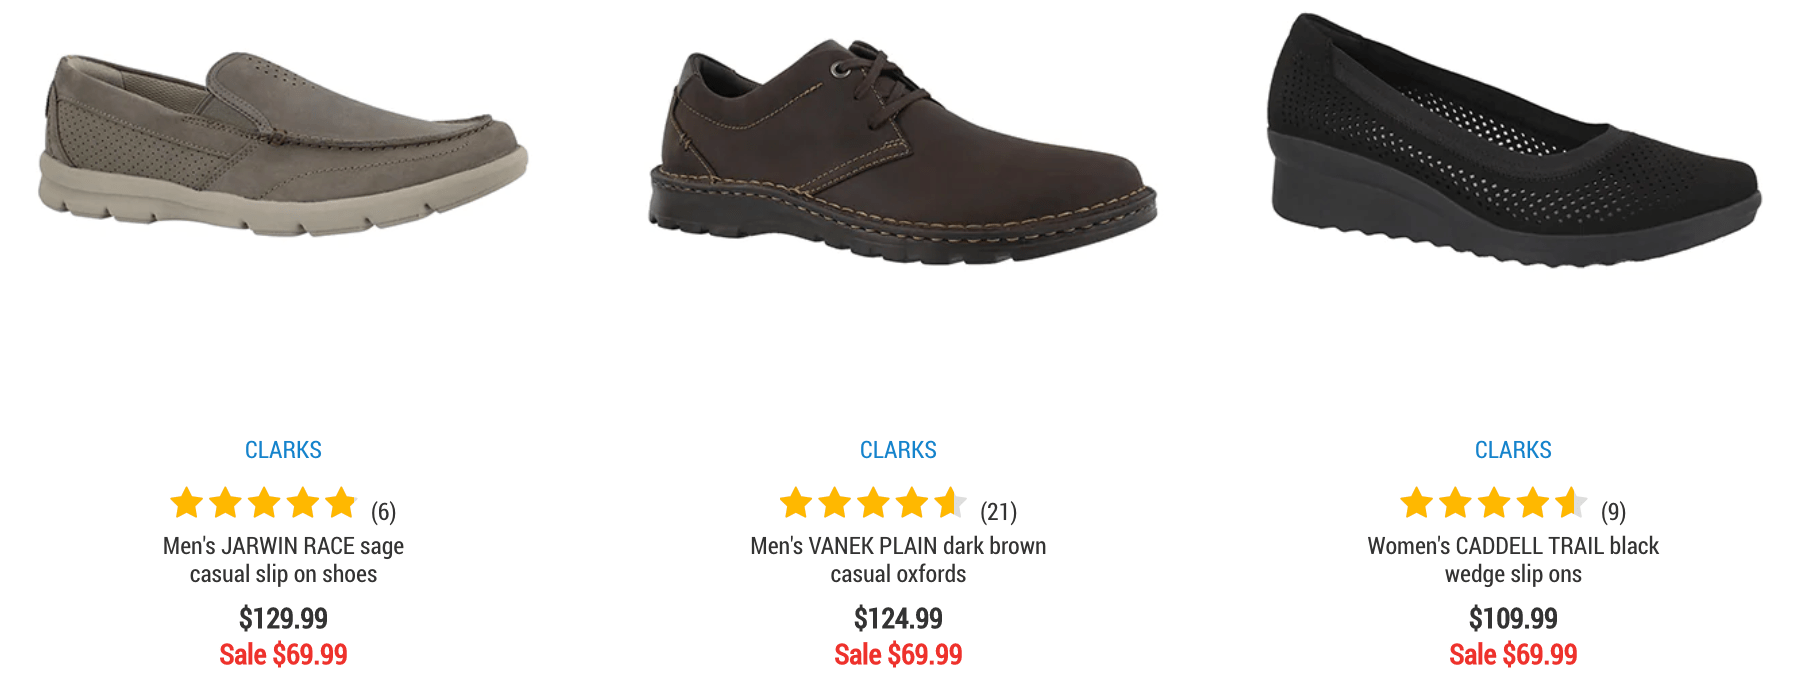 clark shoes canada free shipping